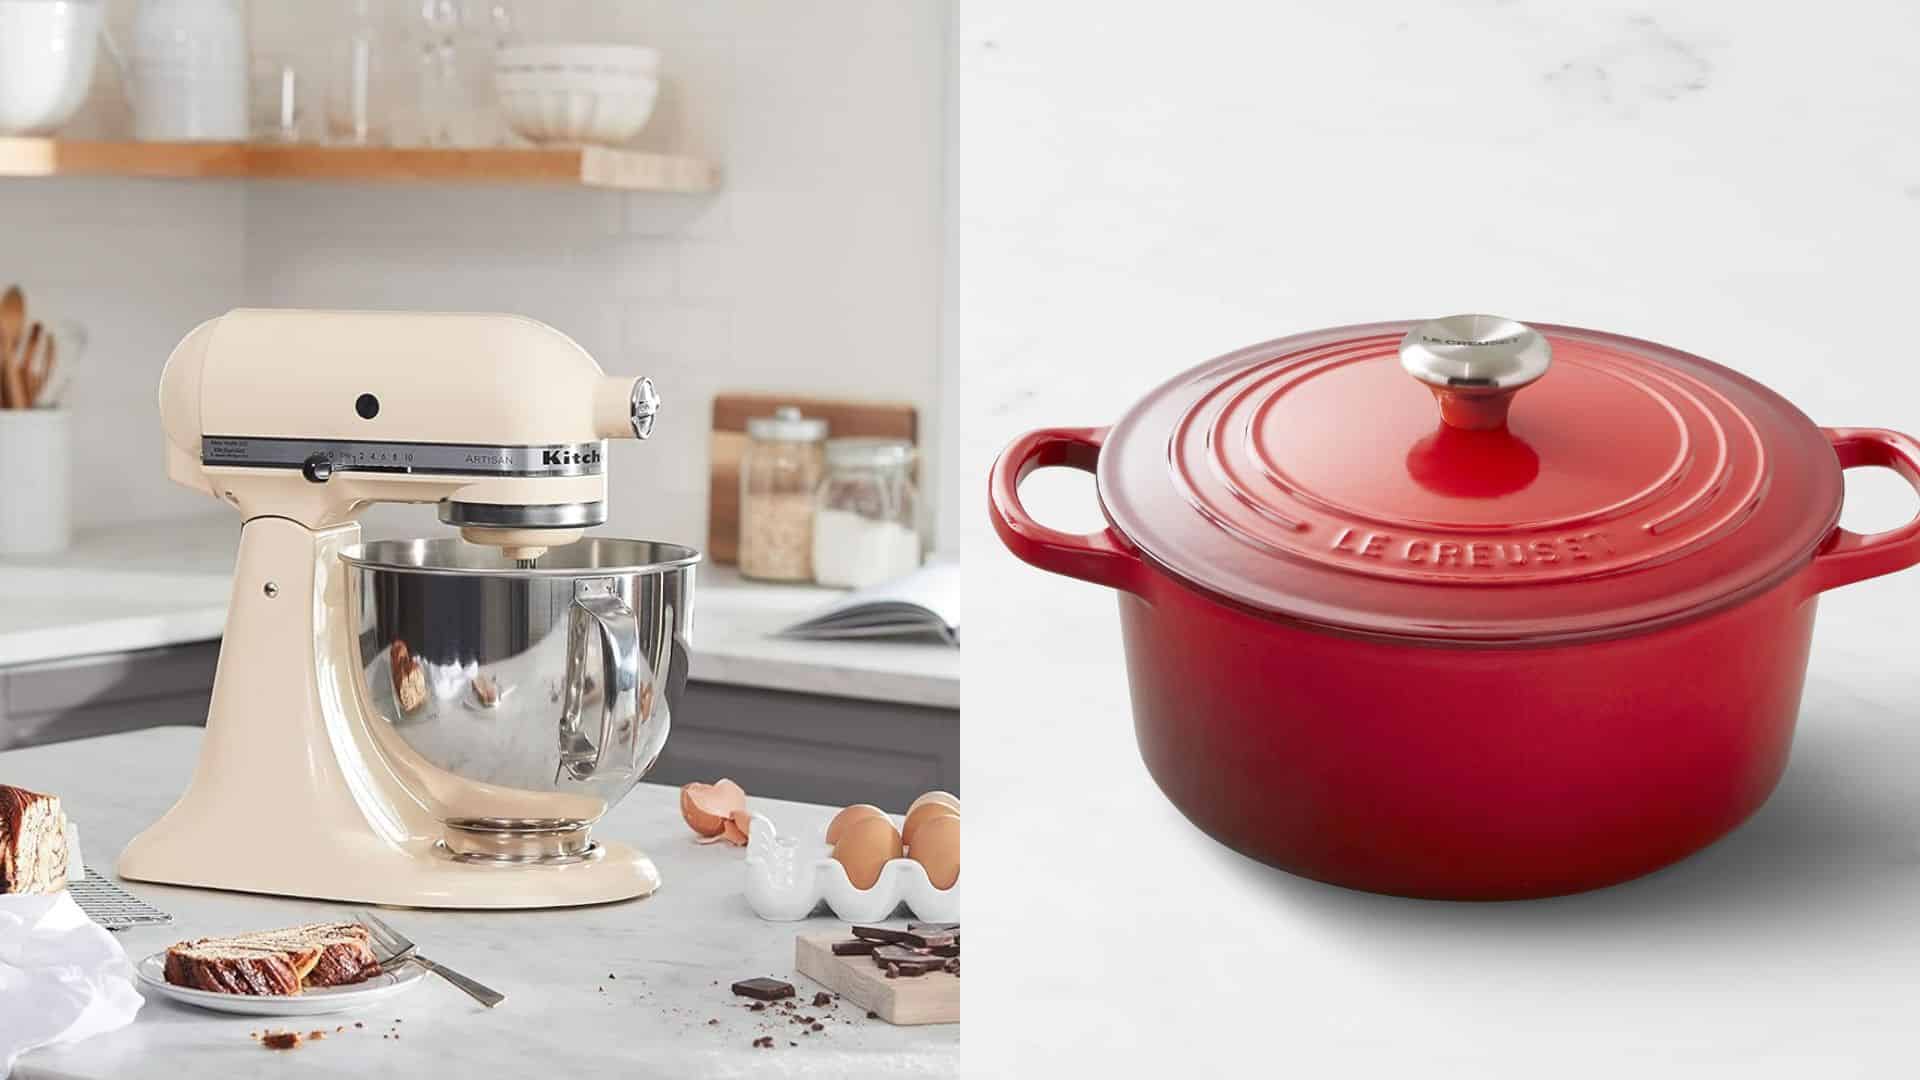 The Best Cyber Monday Deals on My Favorite Kitchen Items - The